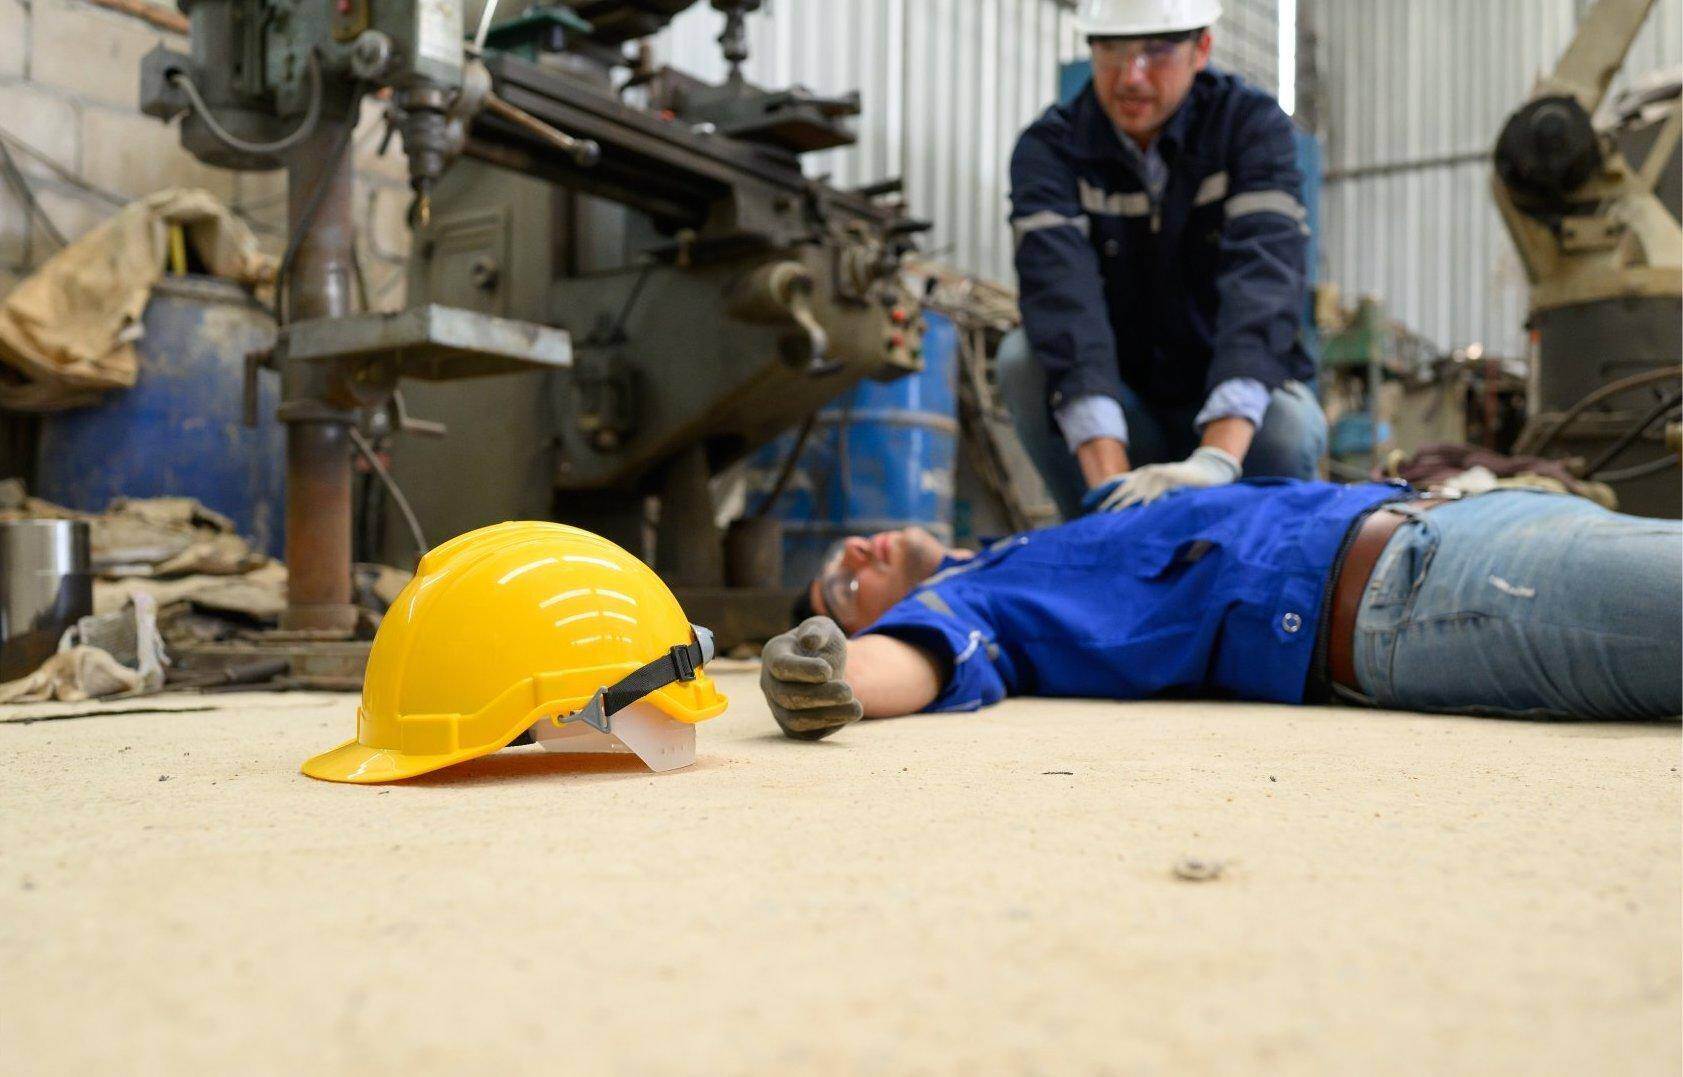 An unconscious man who has been injured on the job who will file for workers compensation in Columbus, Georgia